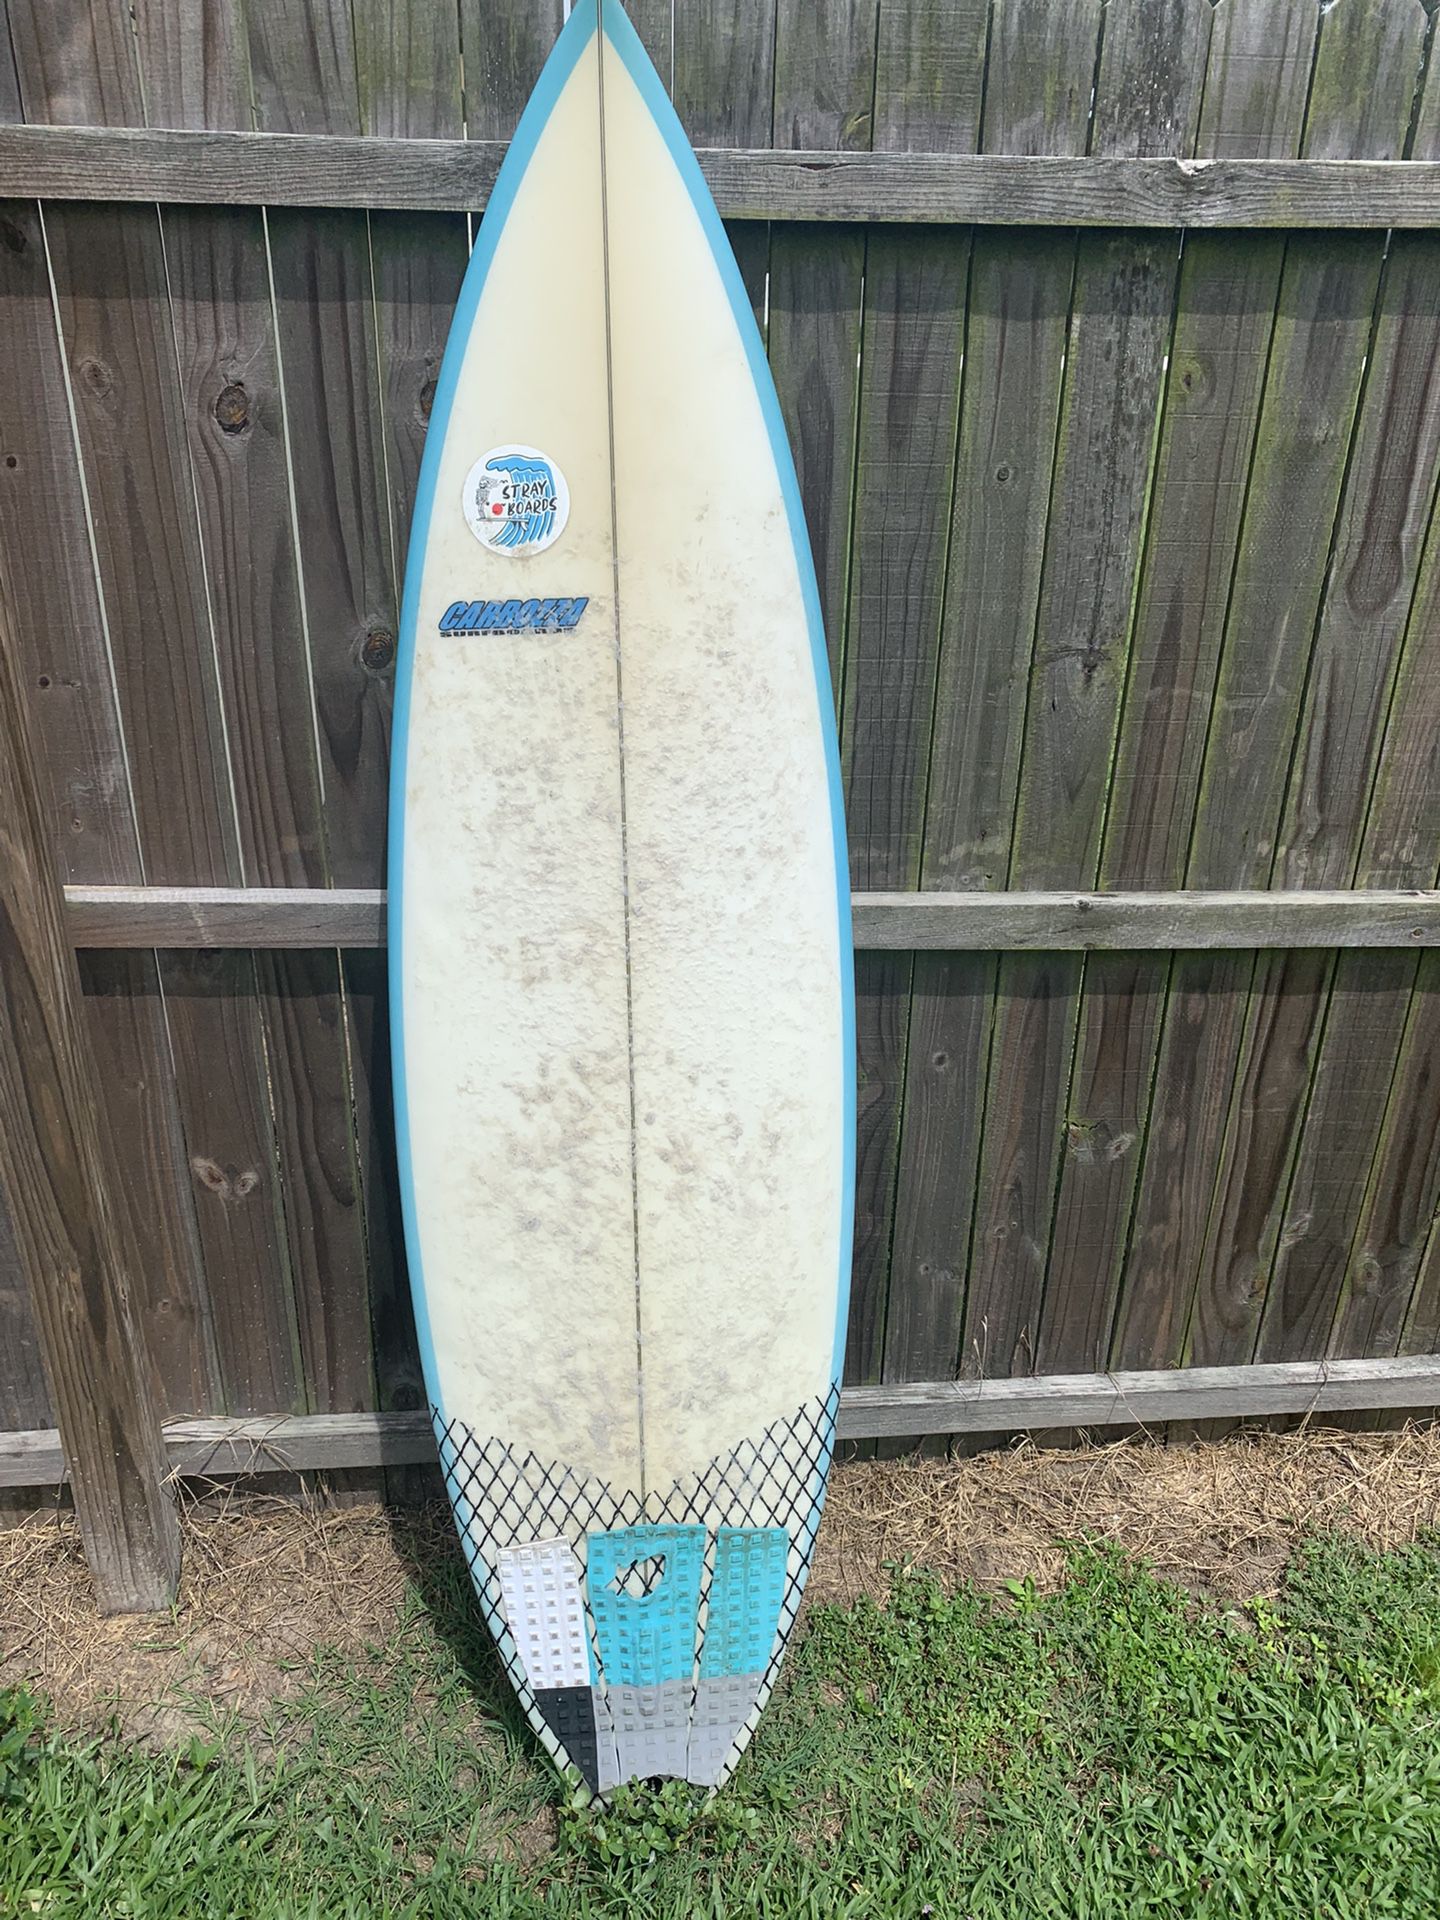  CARROZZA shortboard surfboard. Willing to trade for small boards